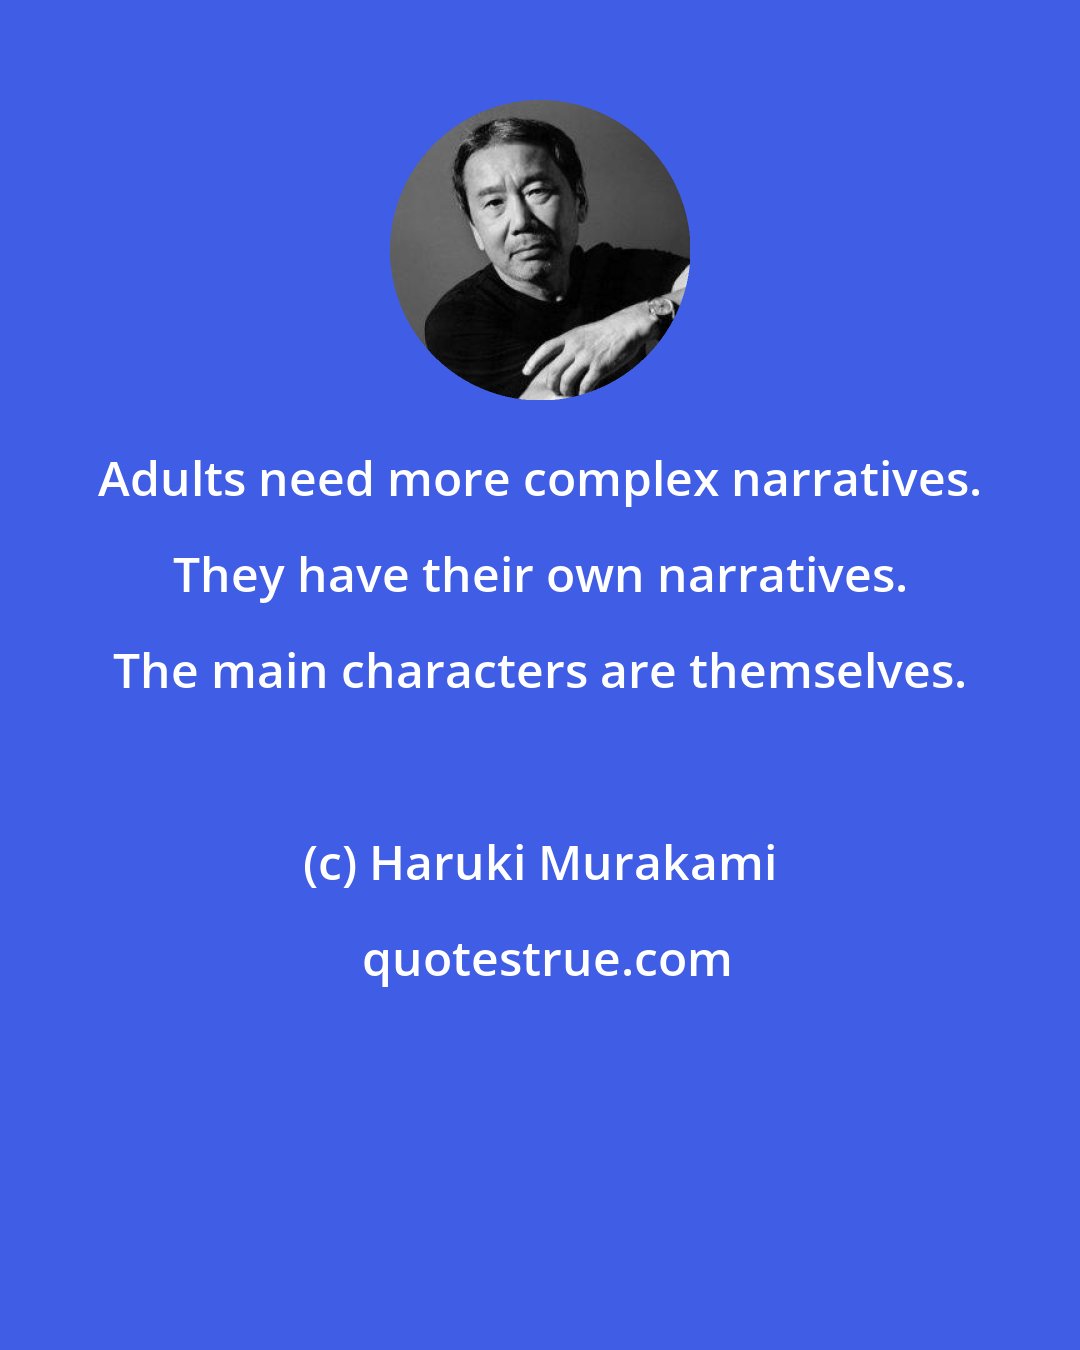 Haruki Murakami: Adults need more complex narratives. They have their own narratives. The main characters are themselves.